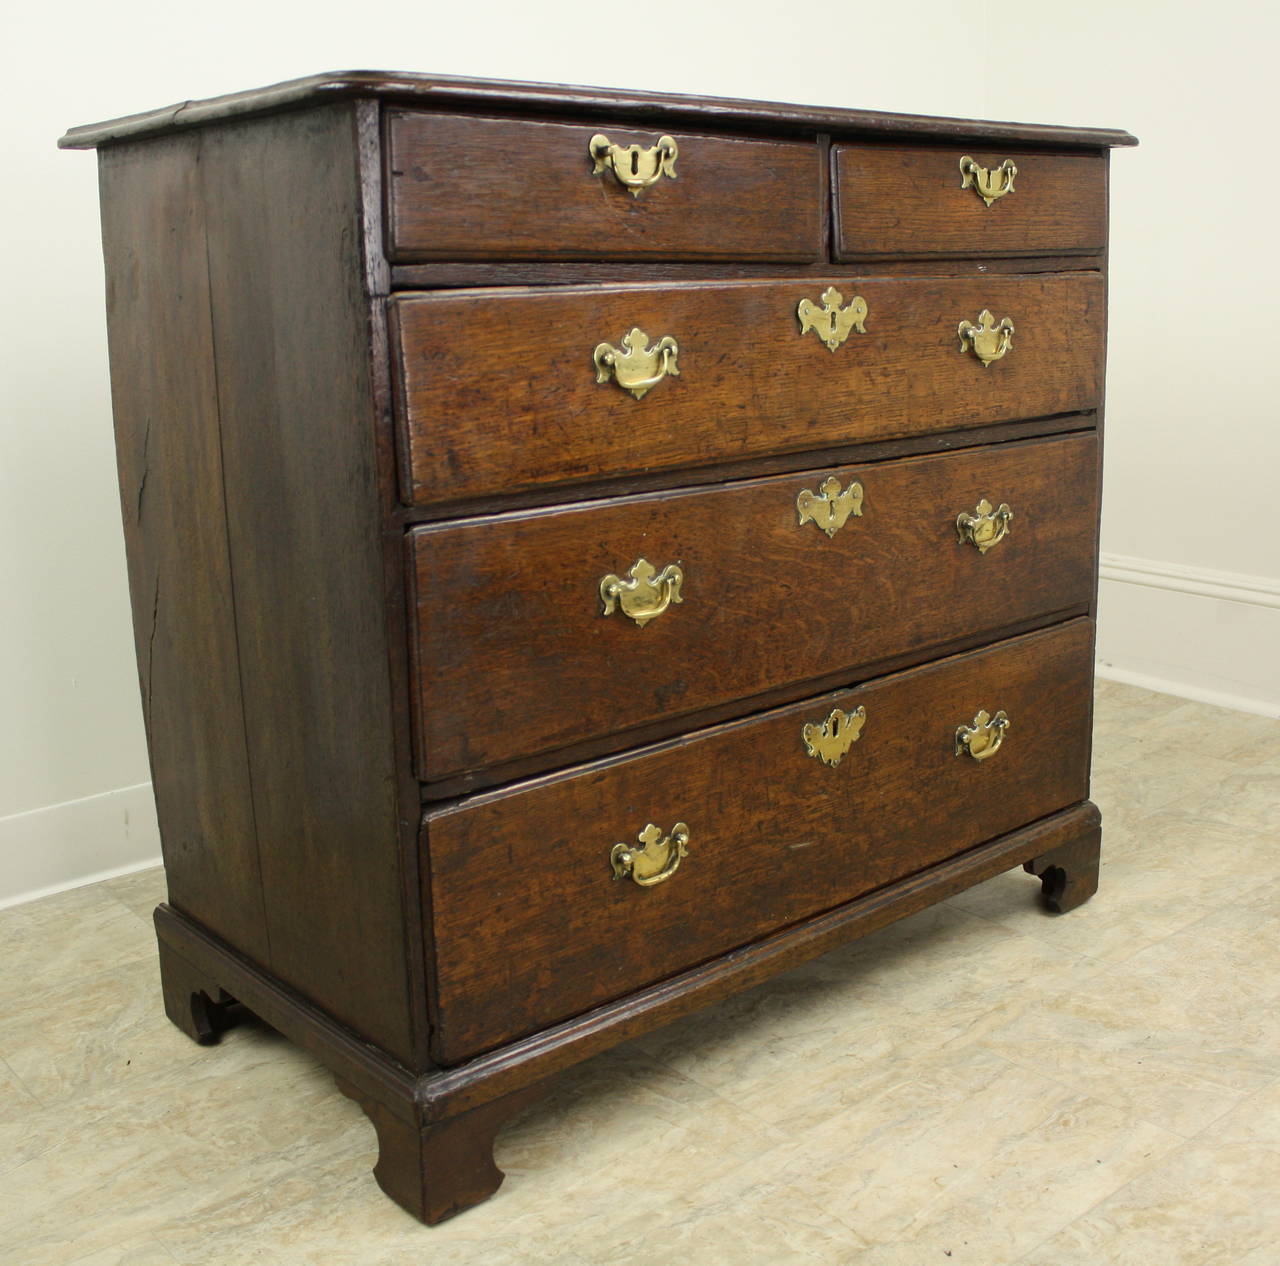 Beautiful original 18th century brasses are a highlight of the terrific early oak dresser. Two drawers over three graded drawers make this a Classic and very attractive configuration. The two-plank top and the gentle ogee edge enhance the overall